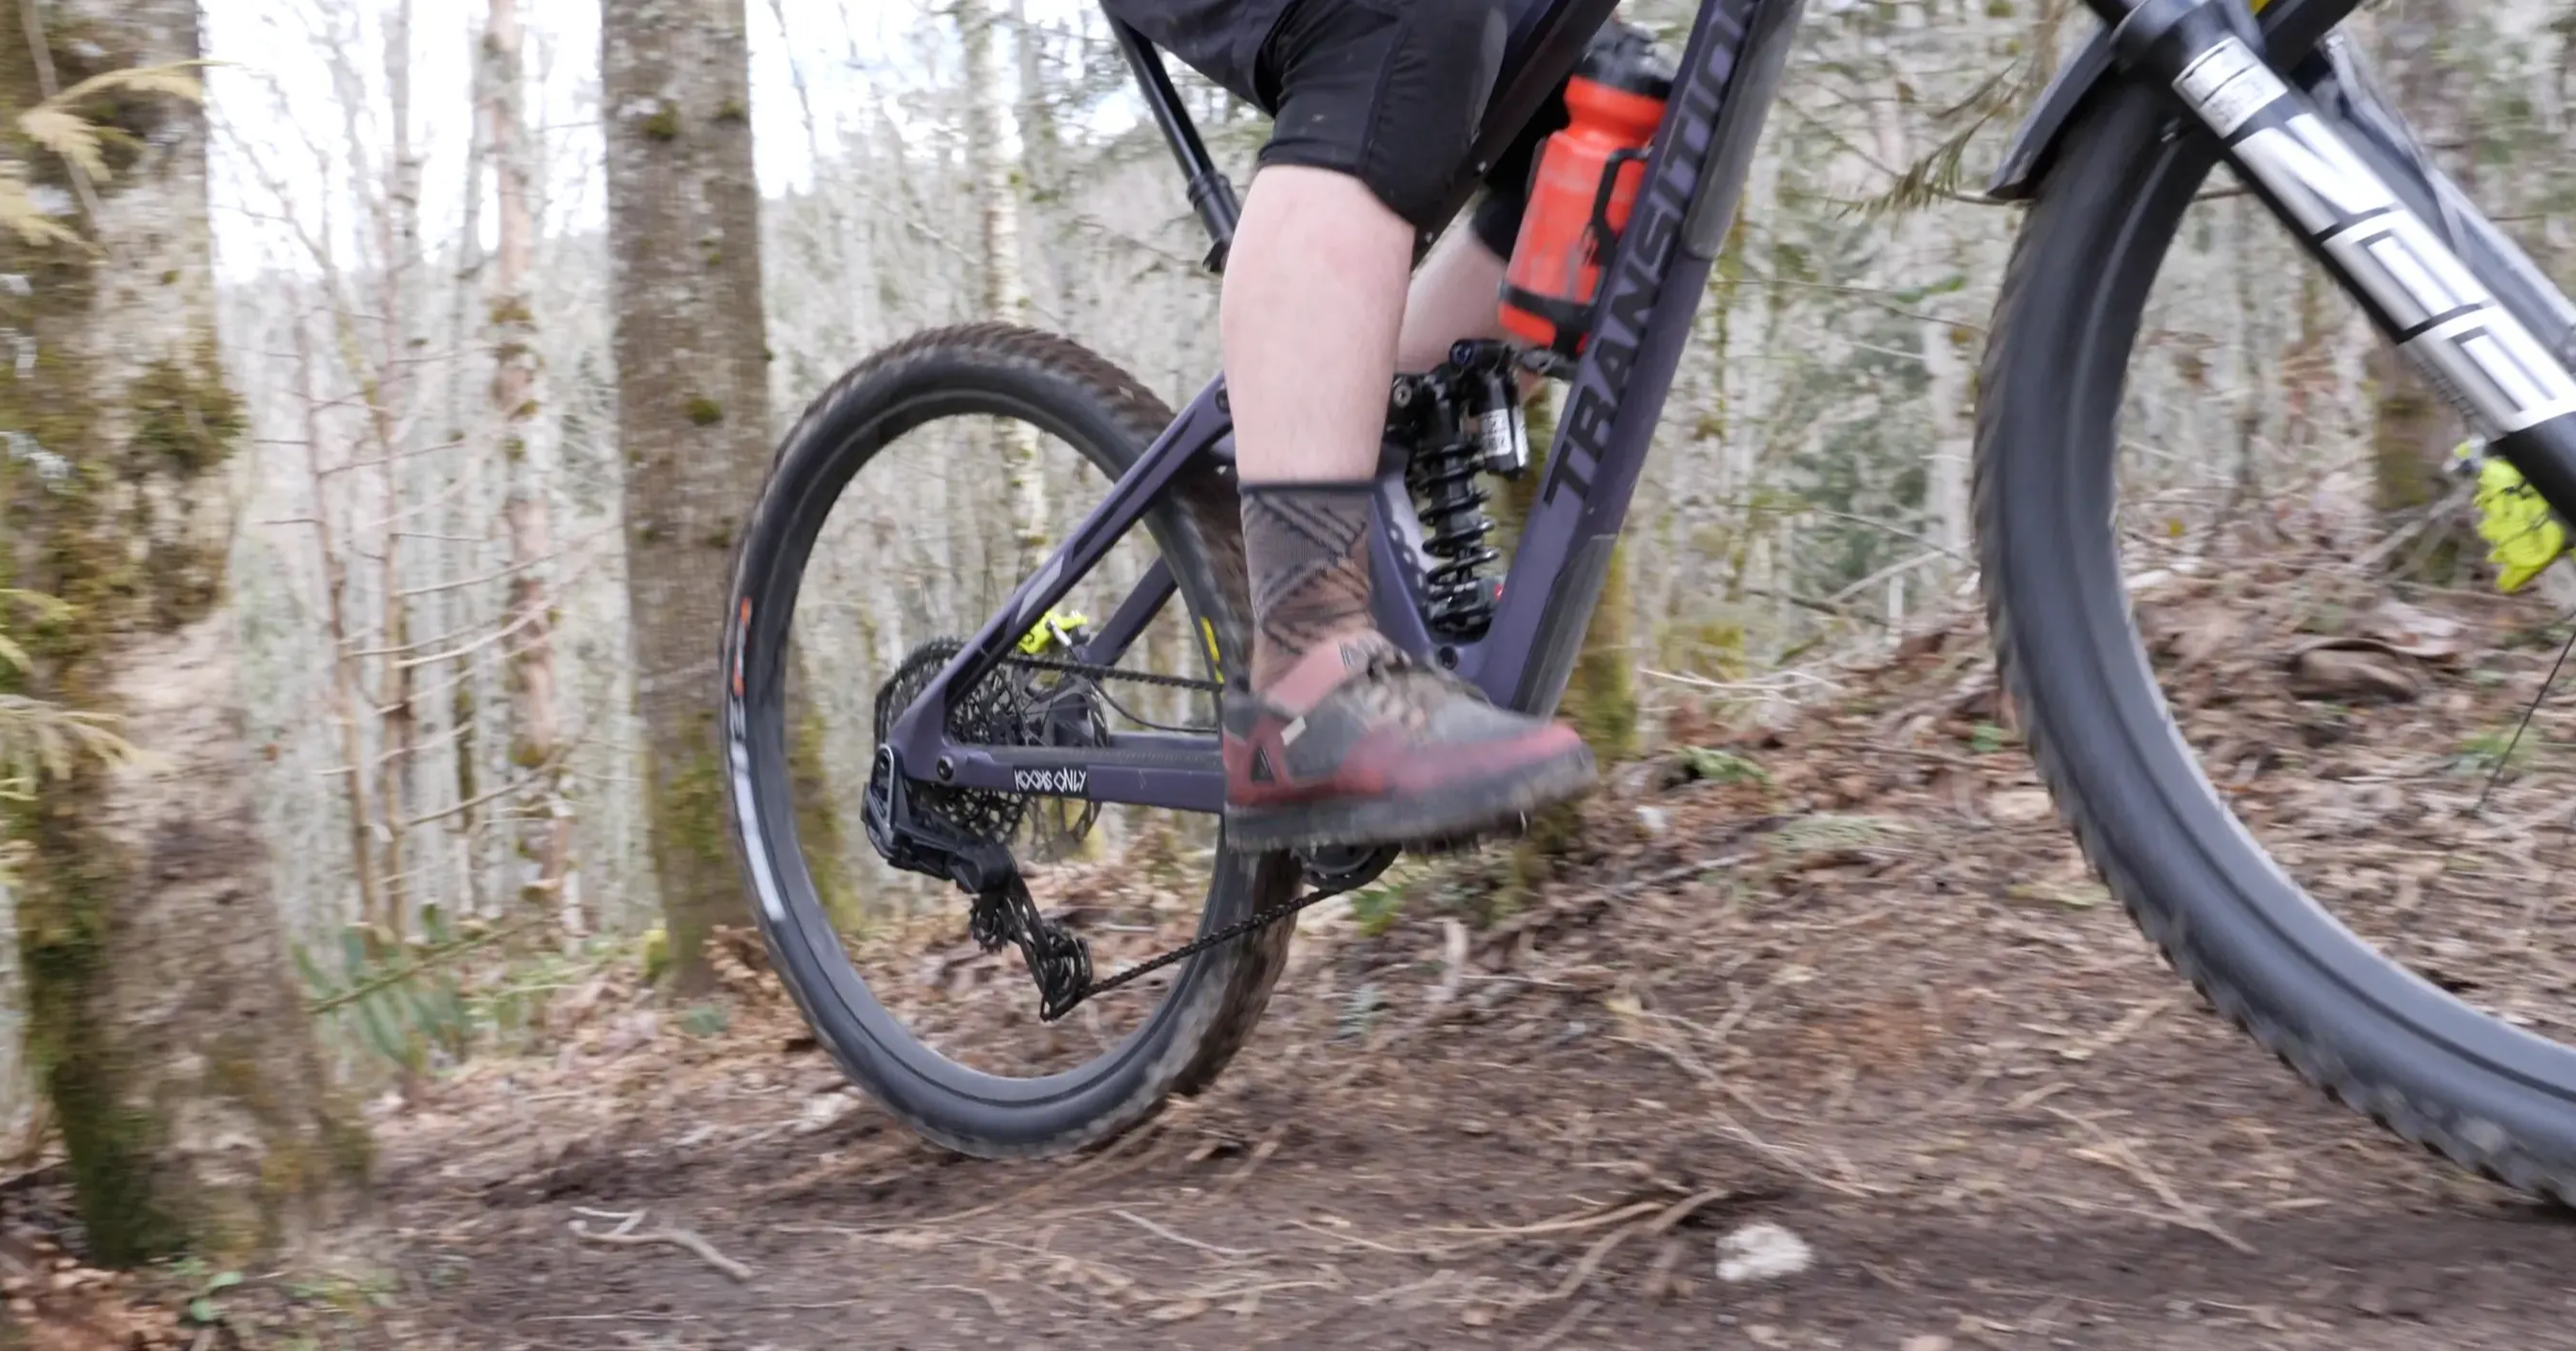 tor climbing roots with a sram x0 axs transmission on his mountain bike 